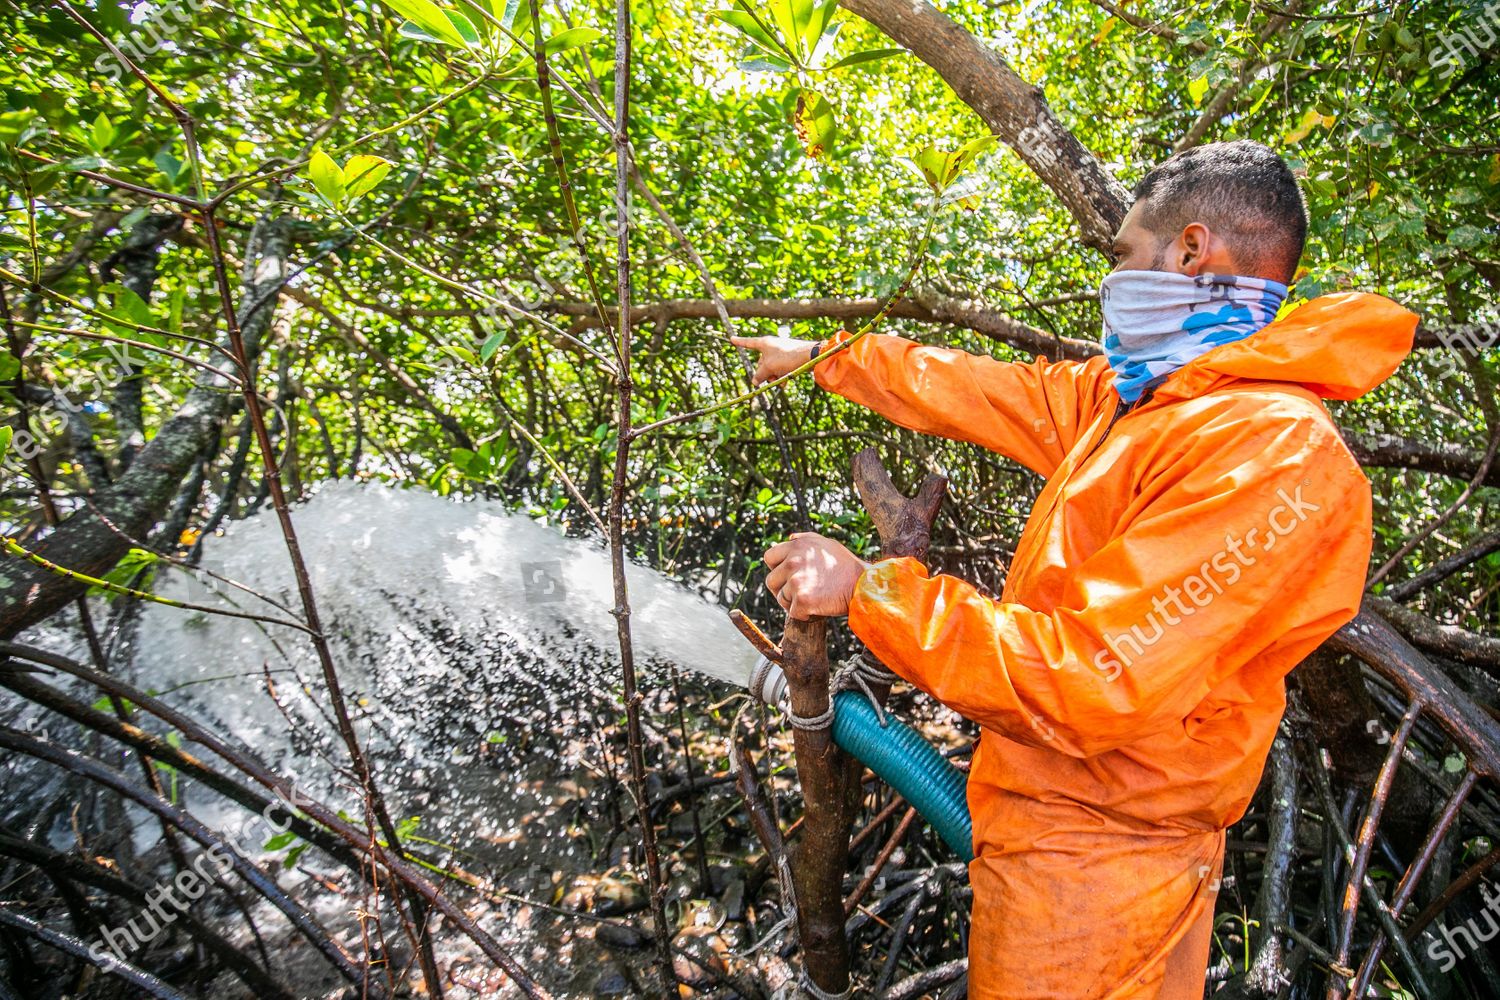 worker-polyeco-cleans-mangroves-oil-following-editorial-stock-photo